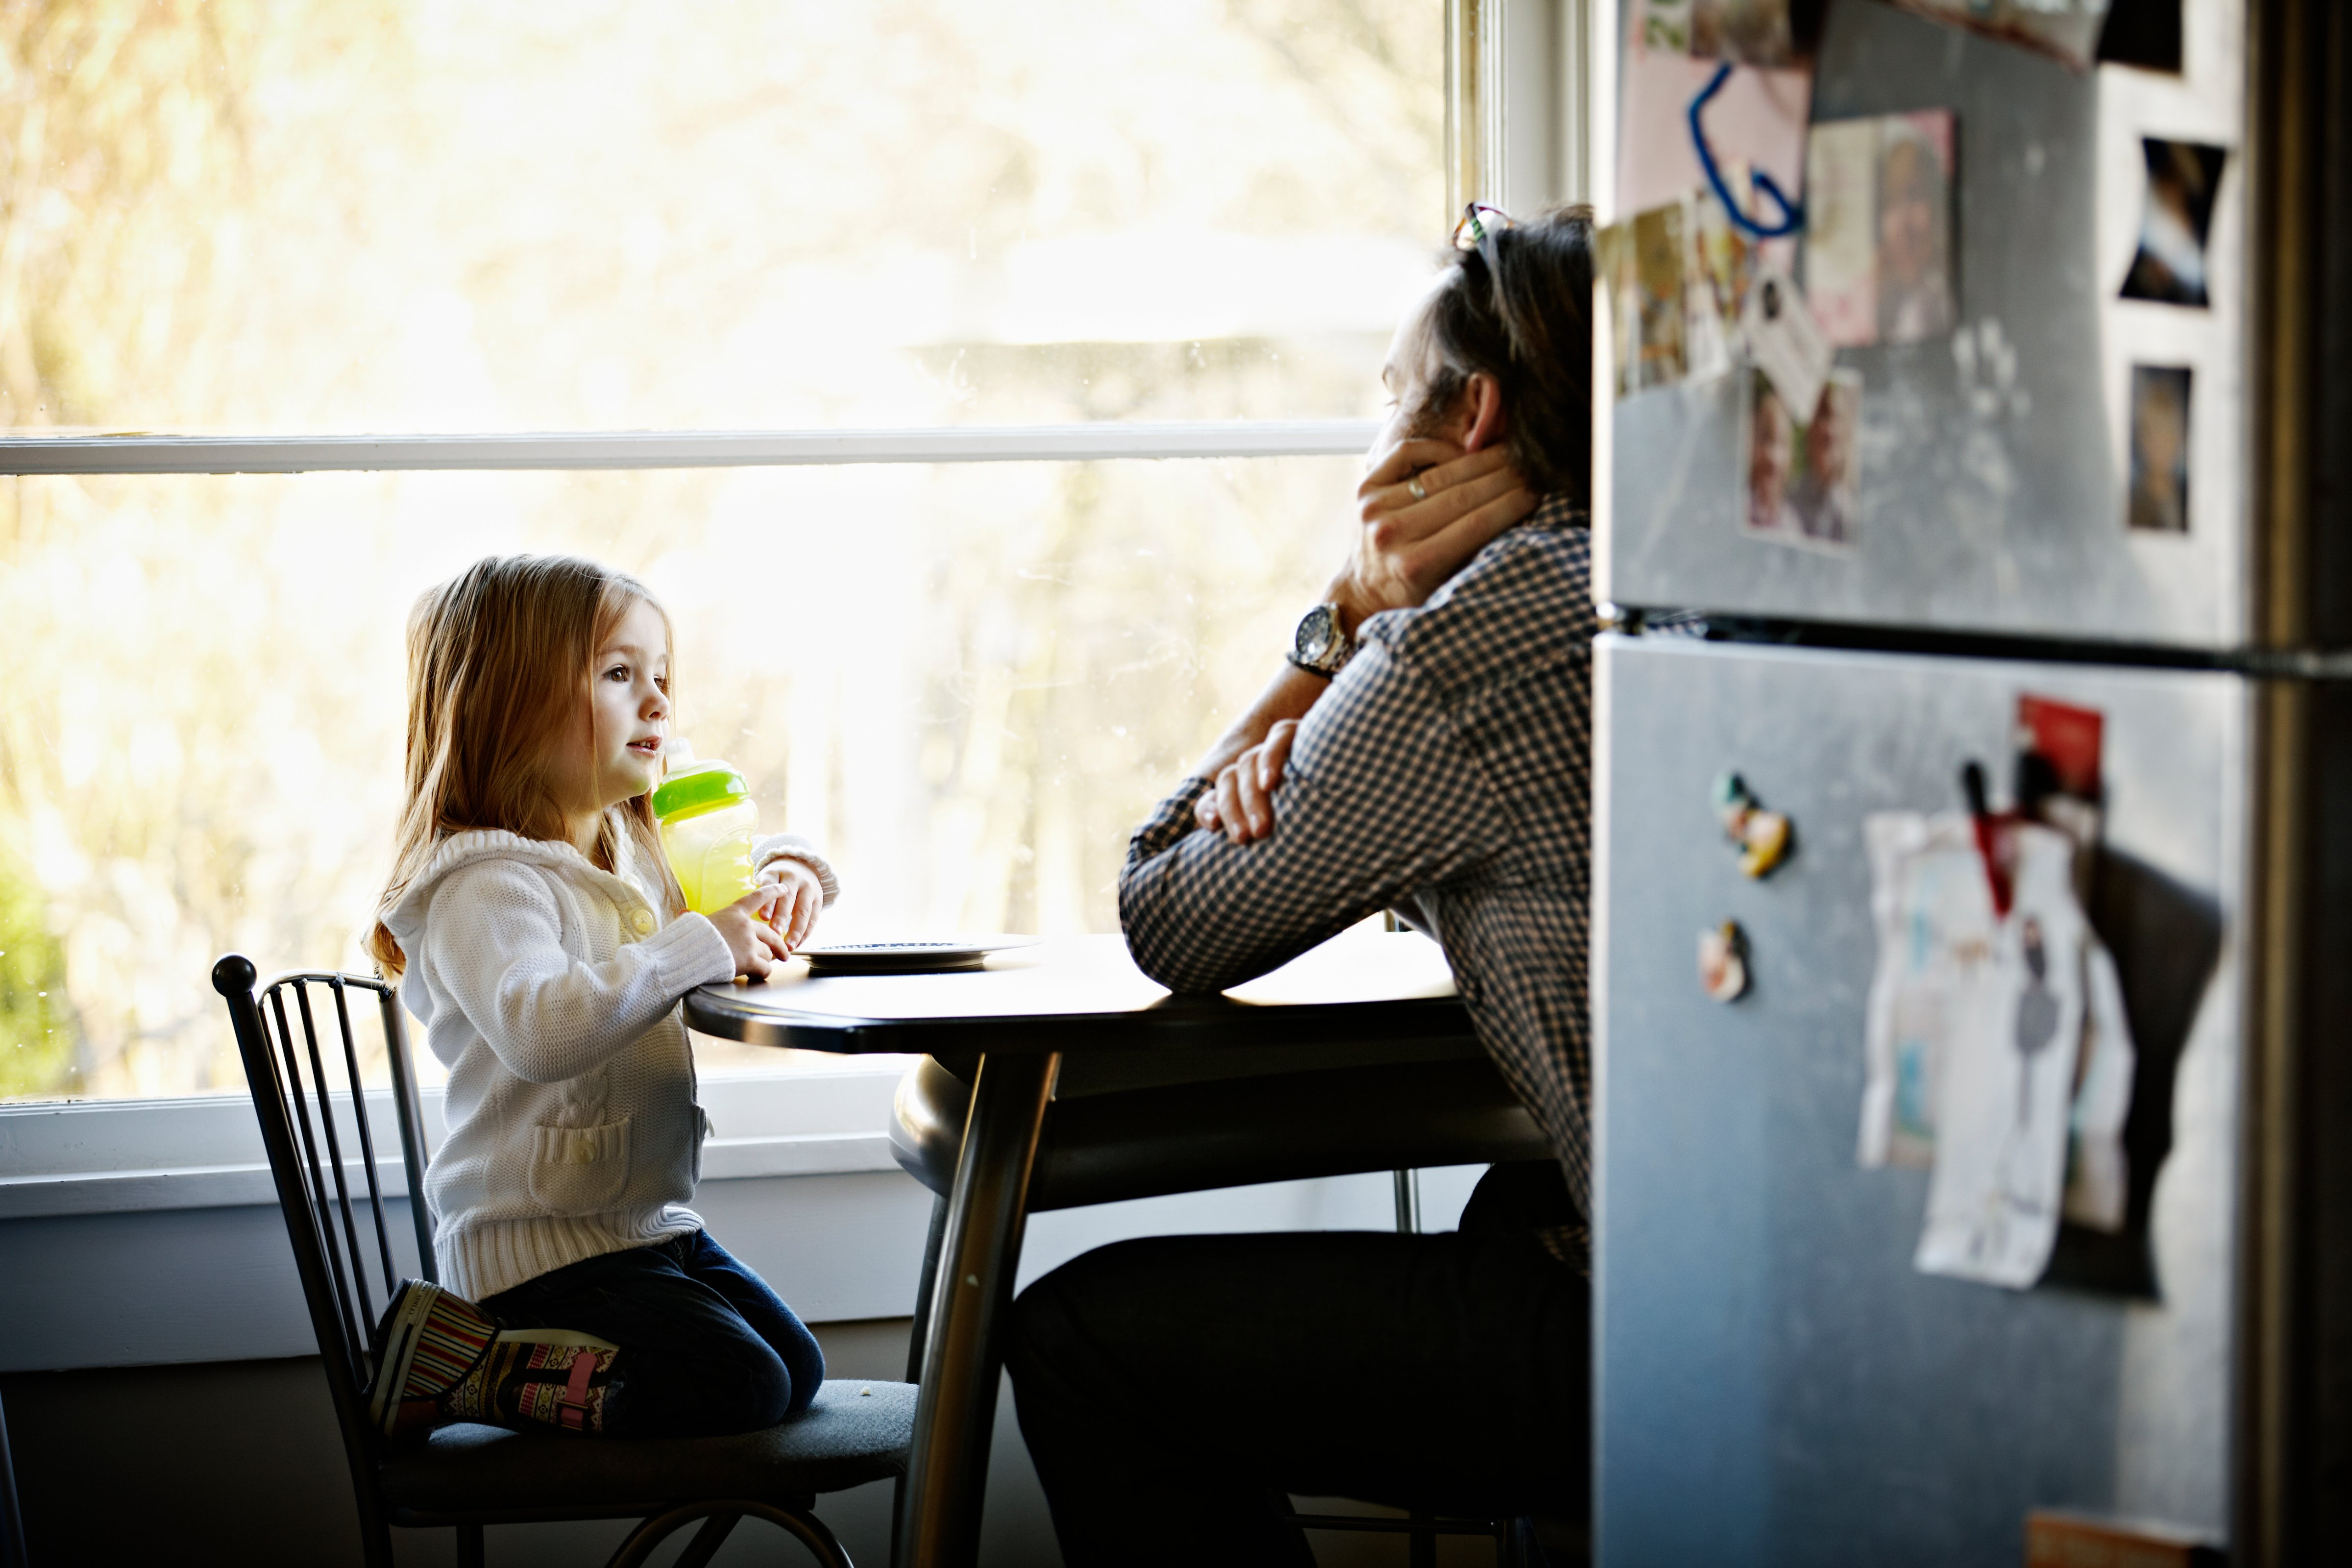 Father and daughter sitting at table in kitchen